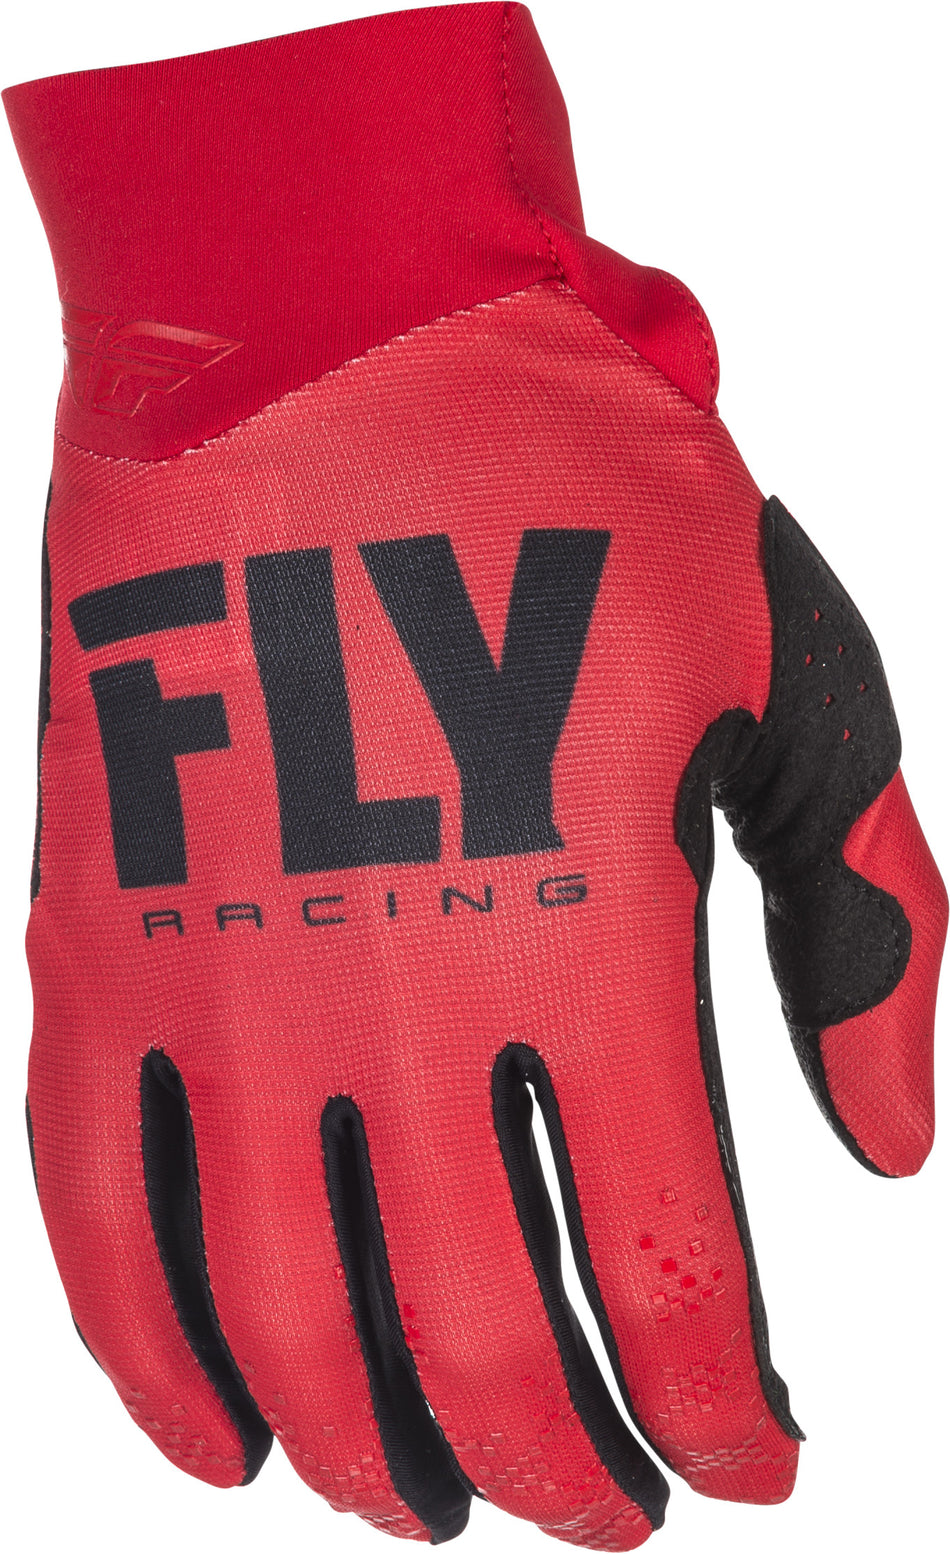 FLY RACING Pro Lite Gloves Red Sz 11 371-81211